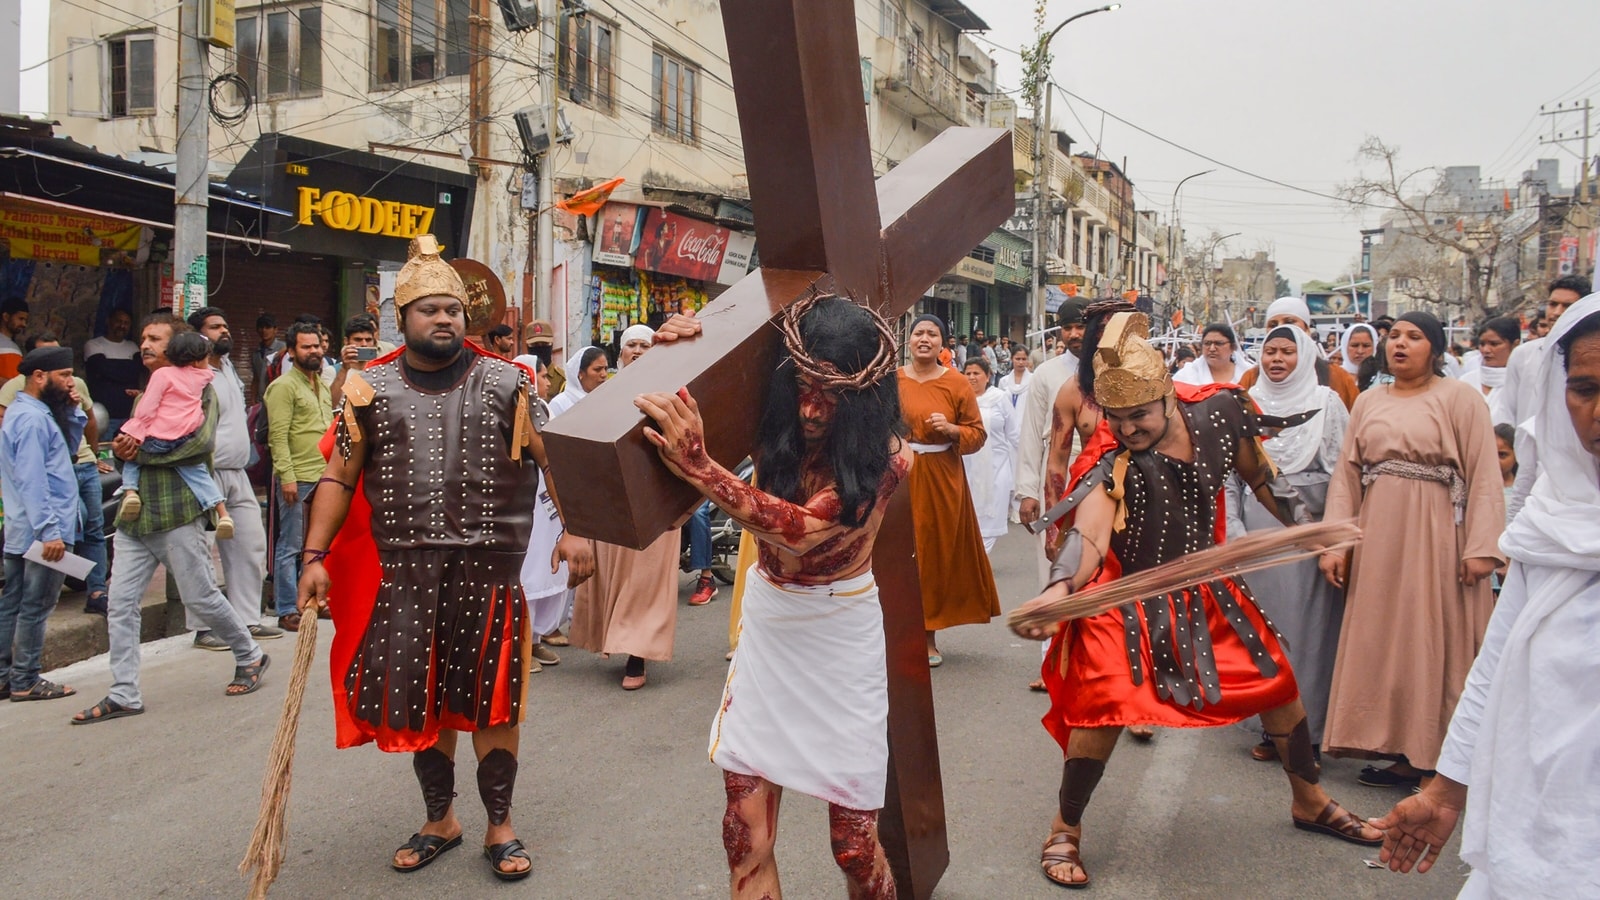 Good Friday traditions: How Christians around the world celebrate the festival